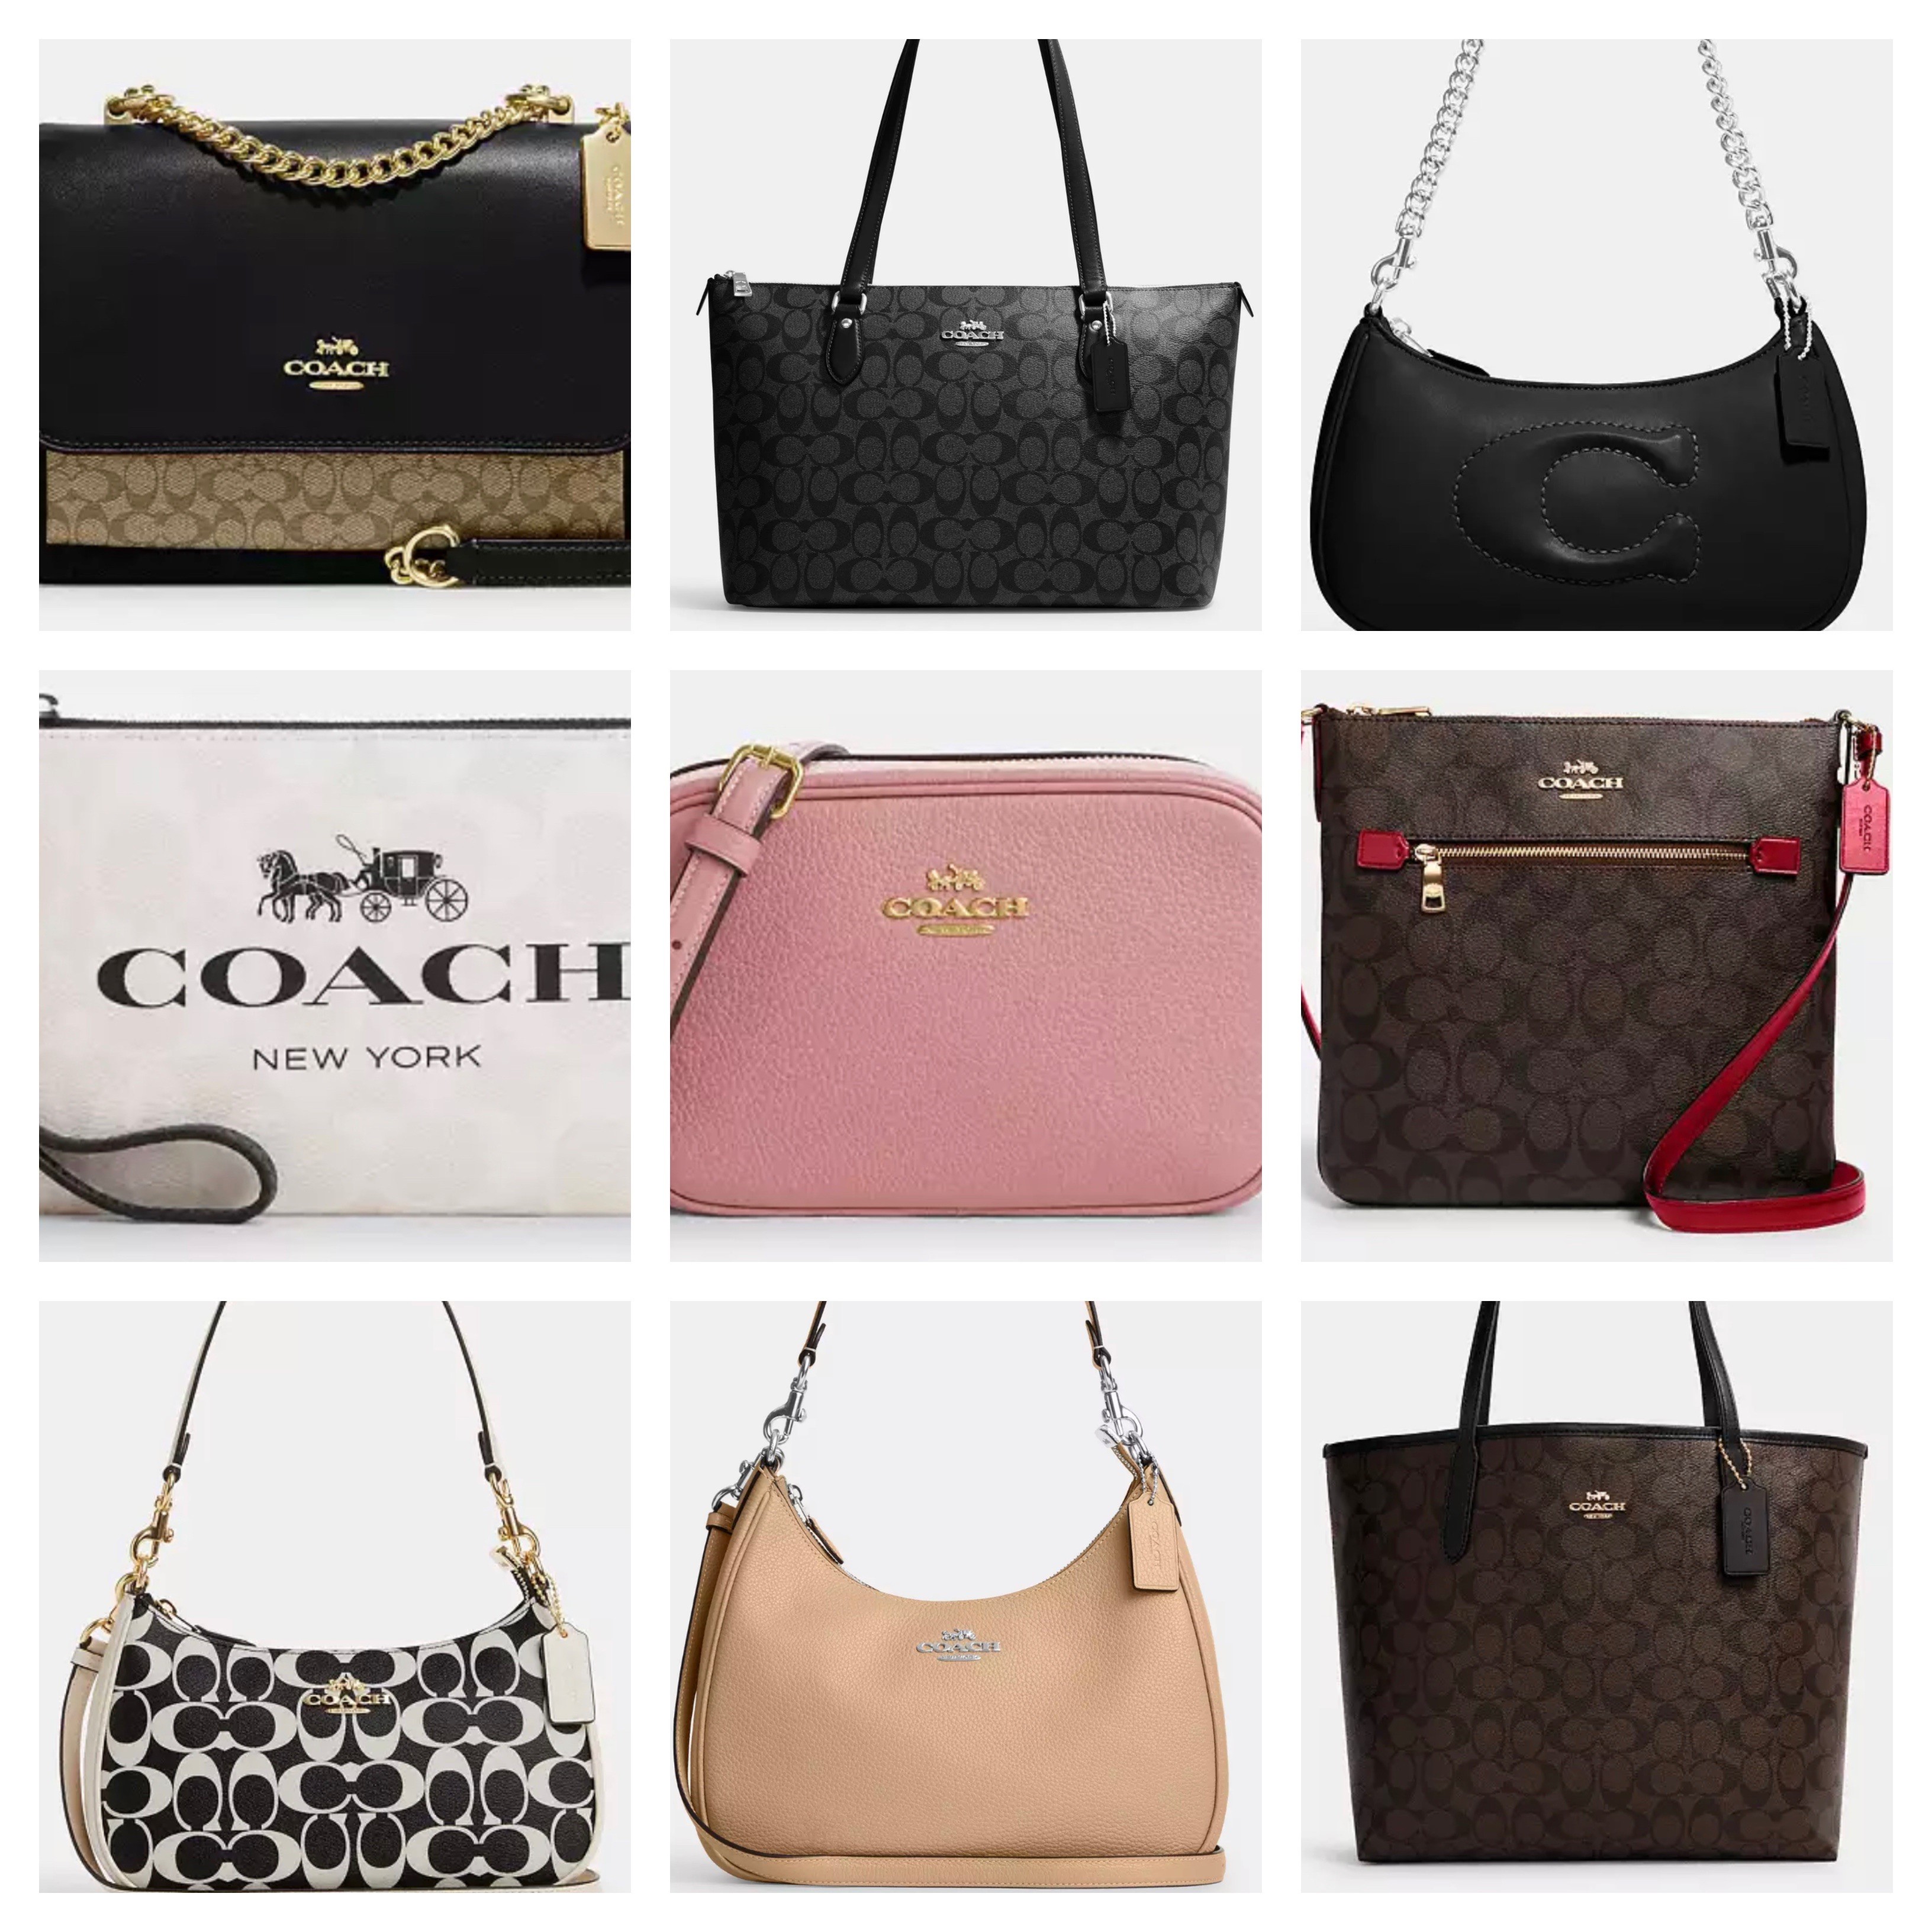 I would like to buy a coach purse and sell - The eBay Community